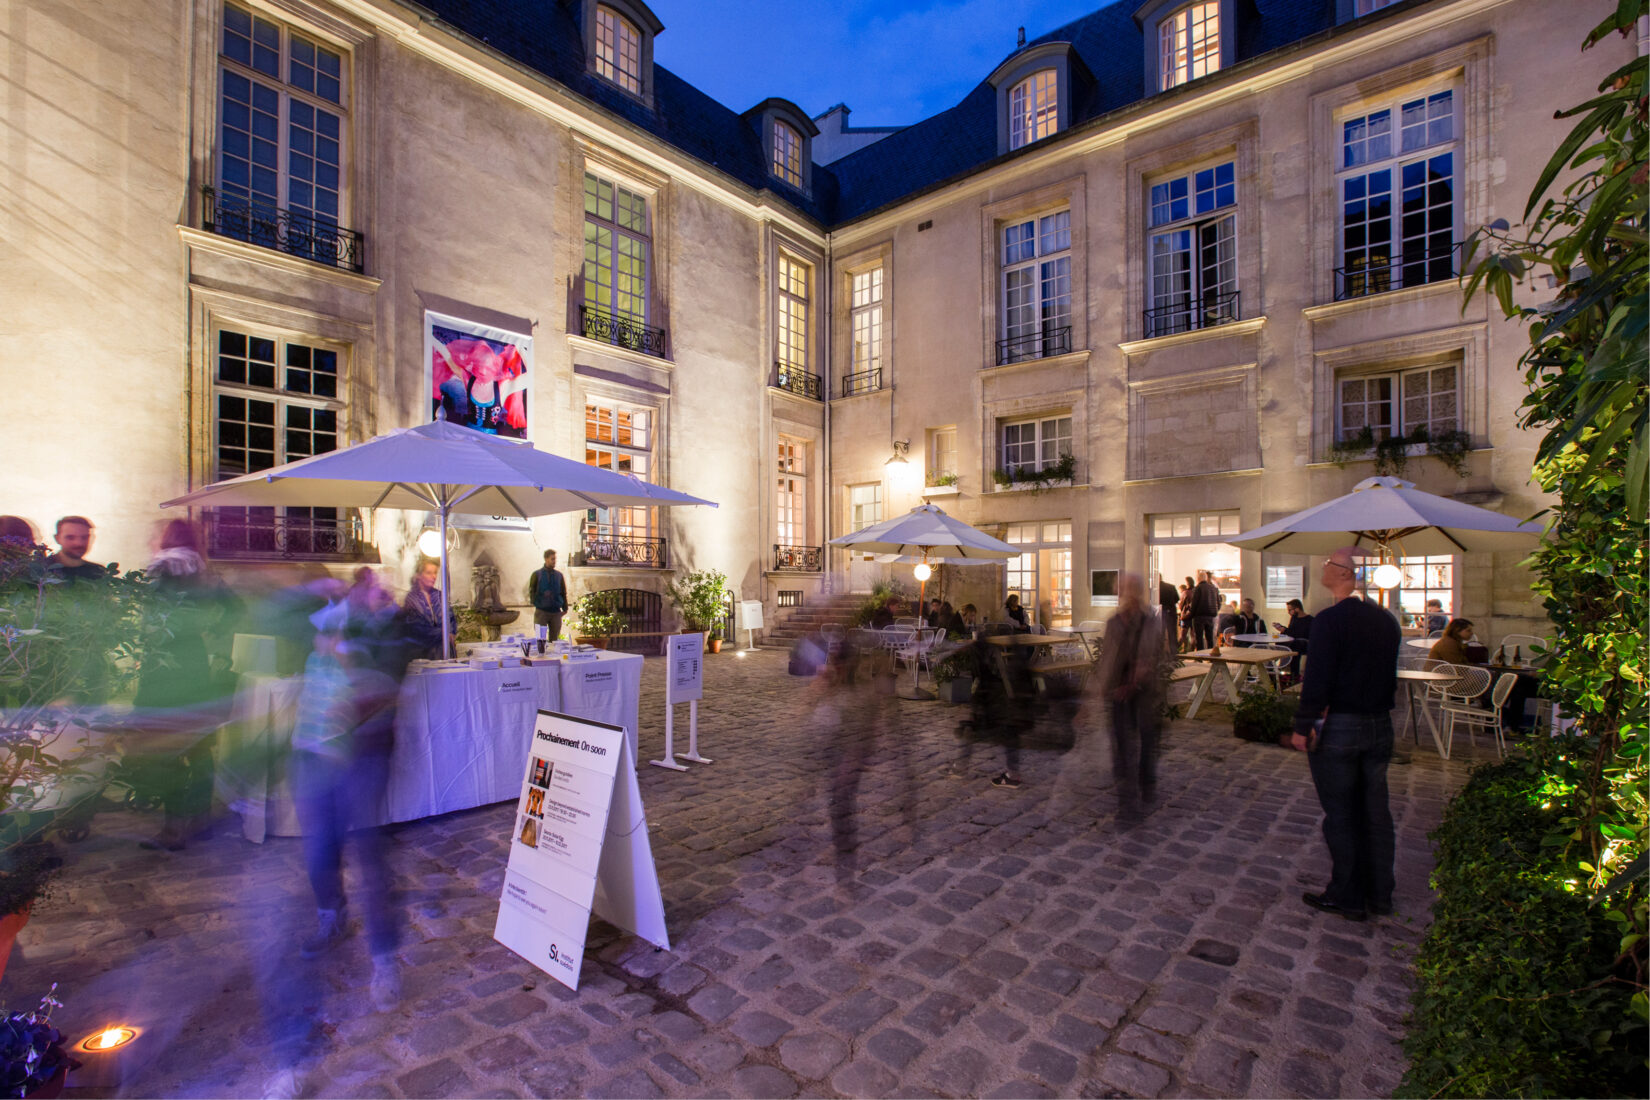 In the courtyard of the Institut suédois, at dusk, visitors are gathering for a vernissage.